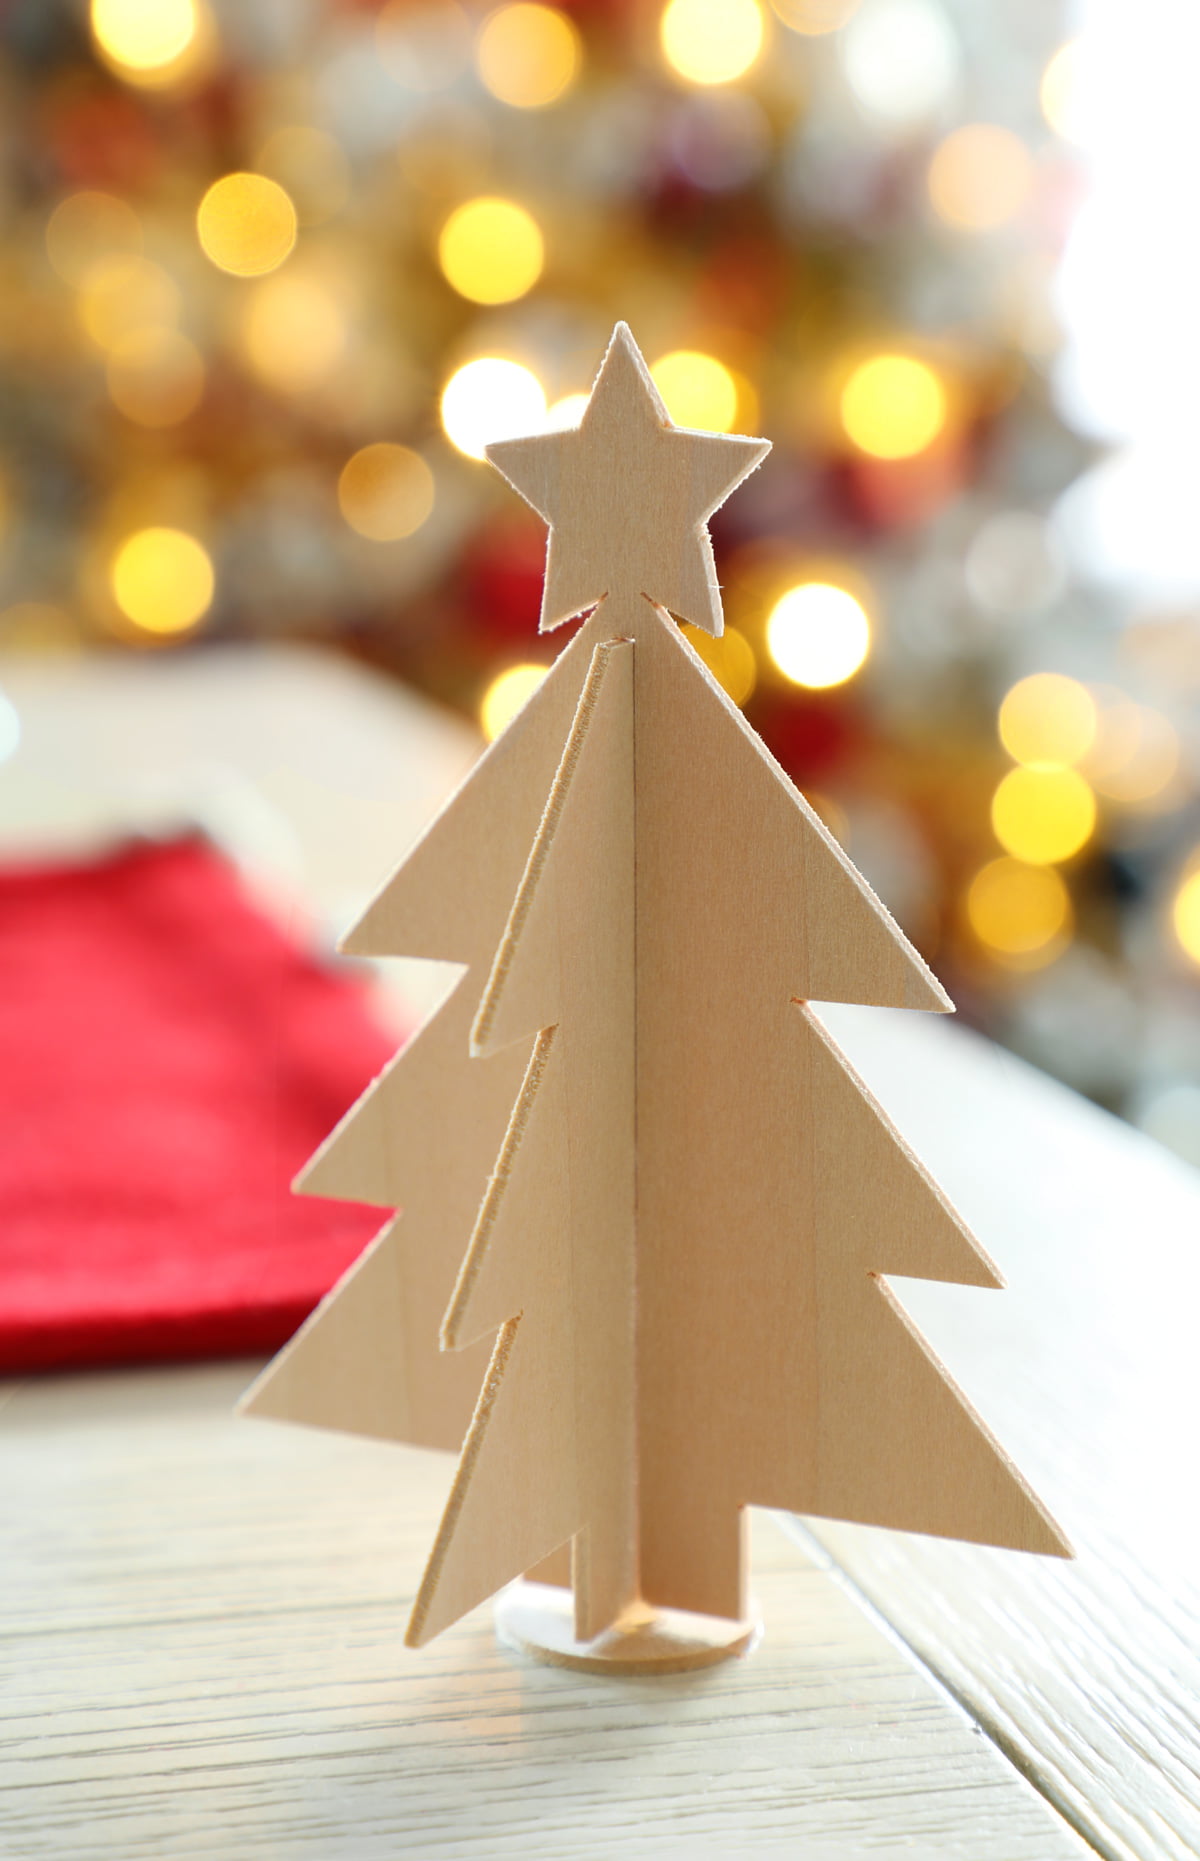 3D wooden Christmas Tree